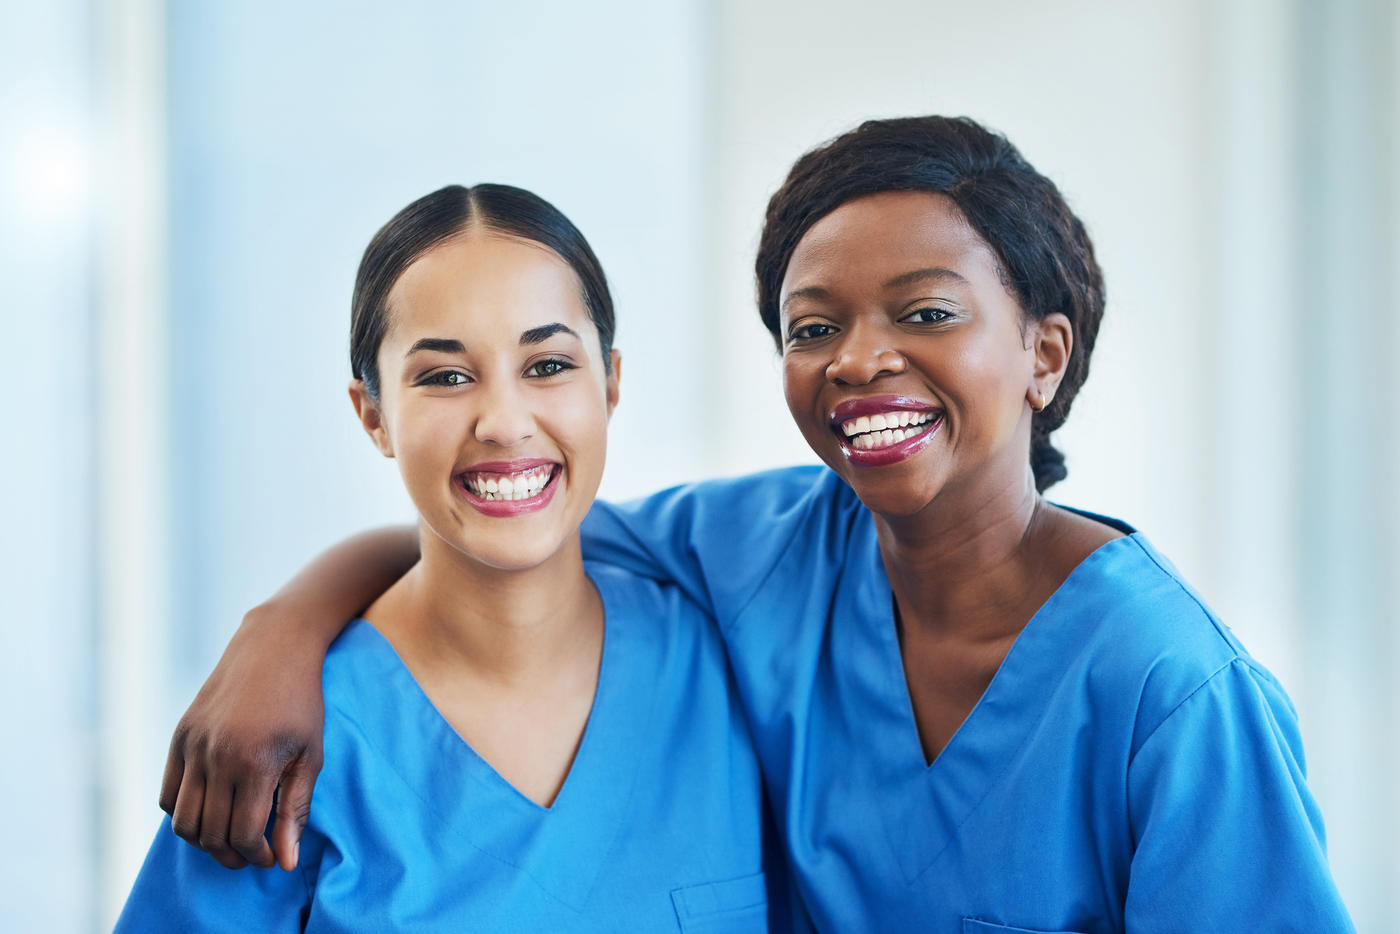 Two smiling women in scrubs, one with her arm around the other